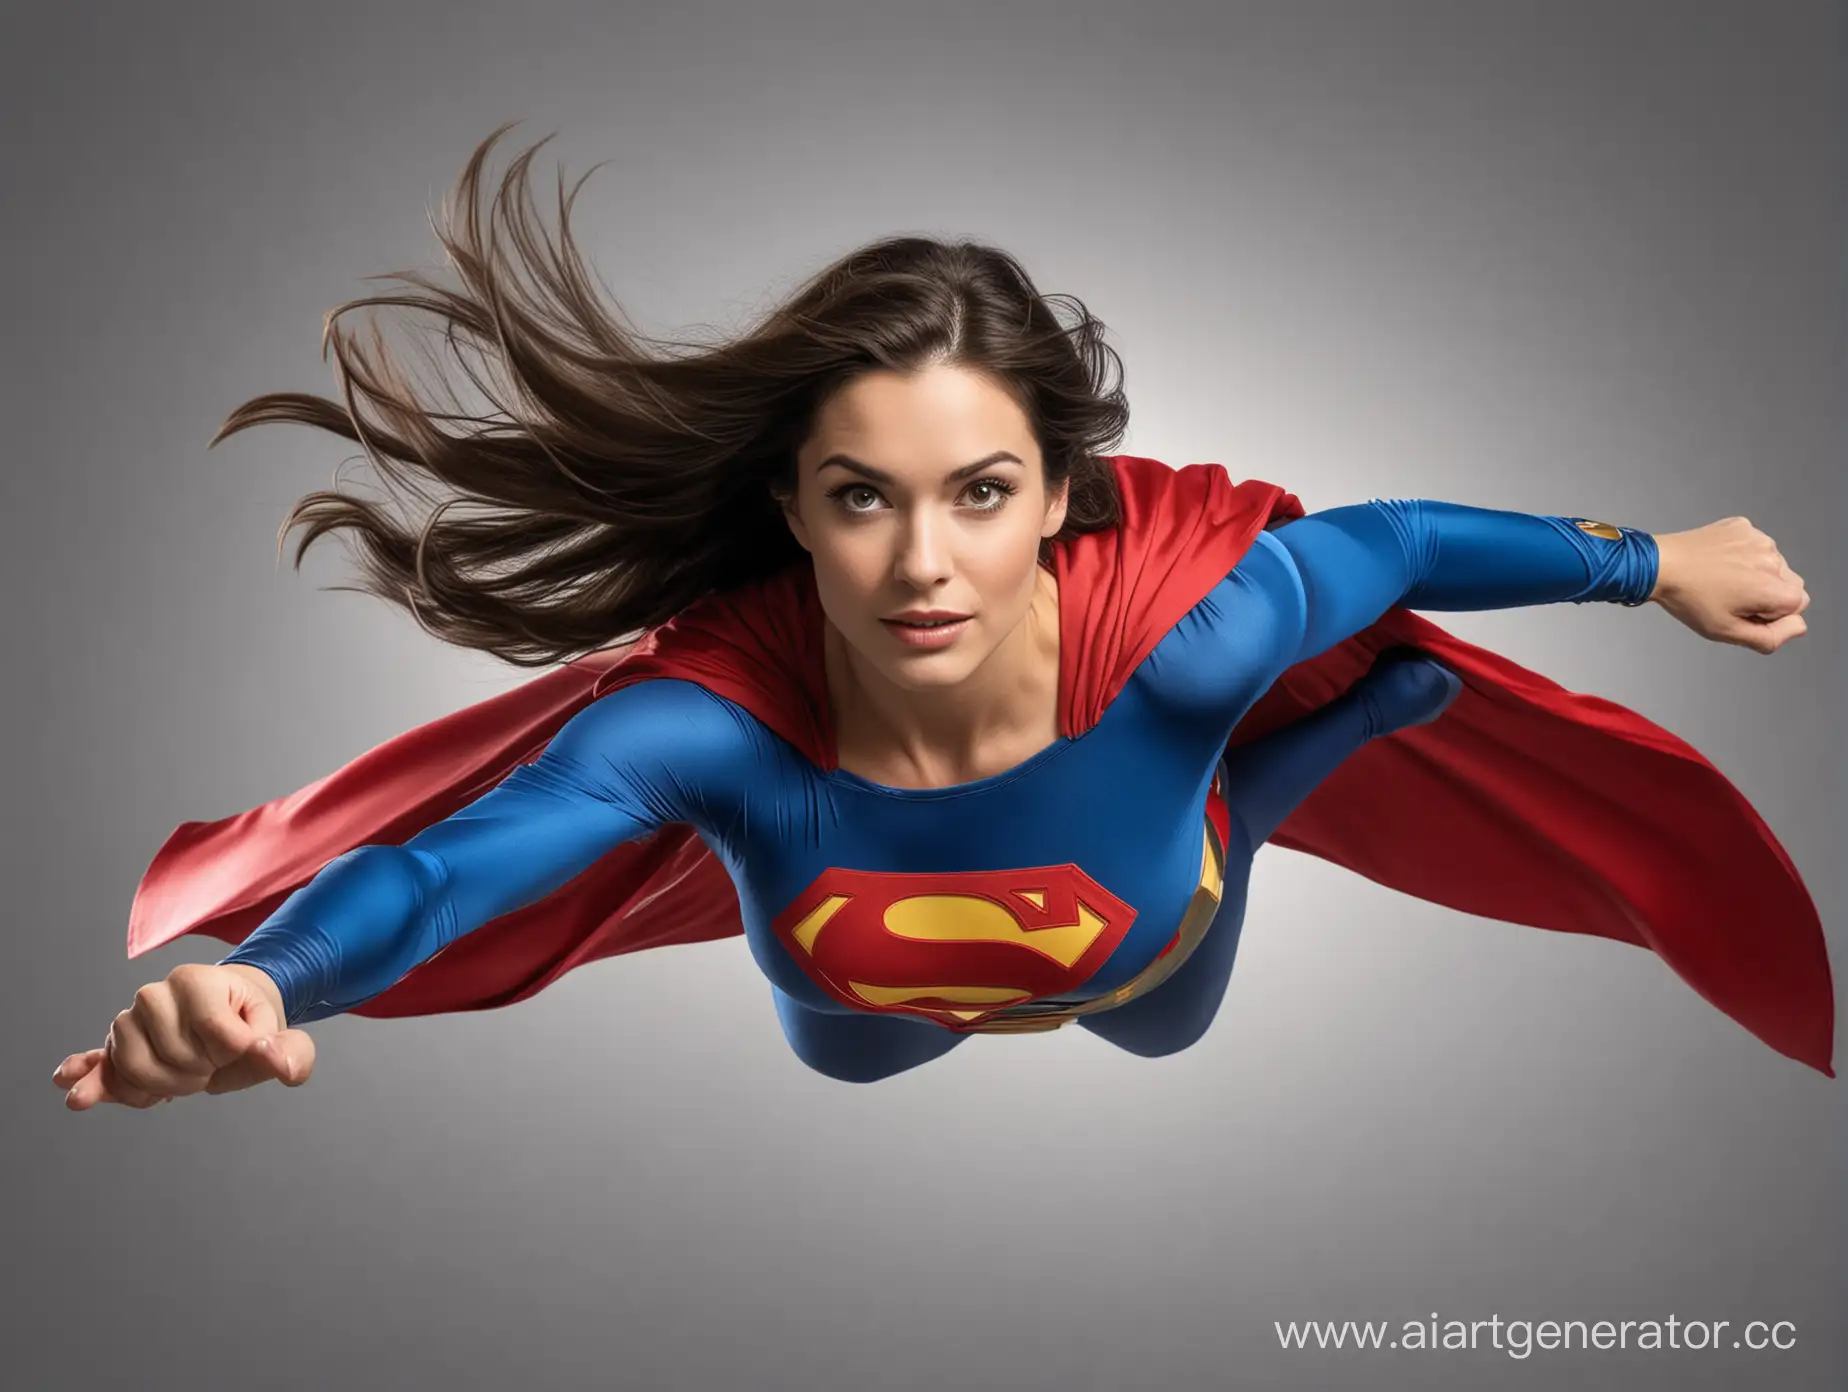 A beautiful woman with long dark brown hair, age 33, She is flying like Superman, she is wearing the classic Superman costume